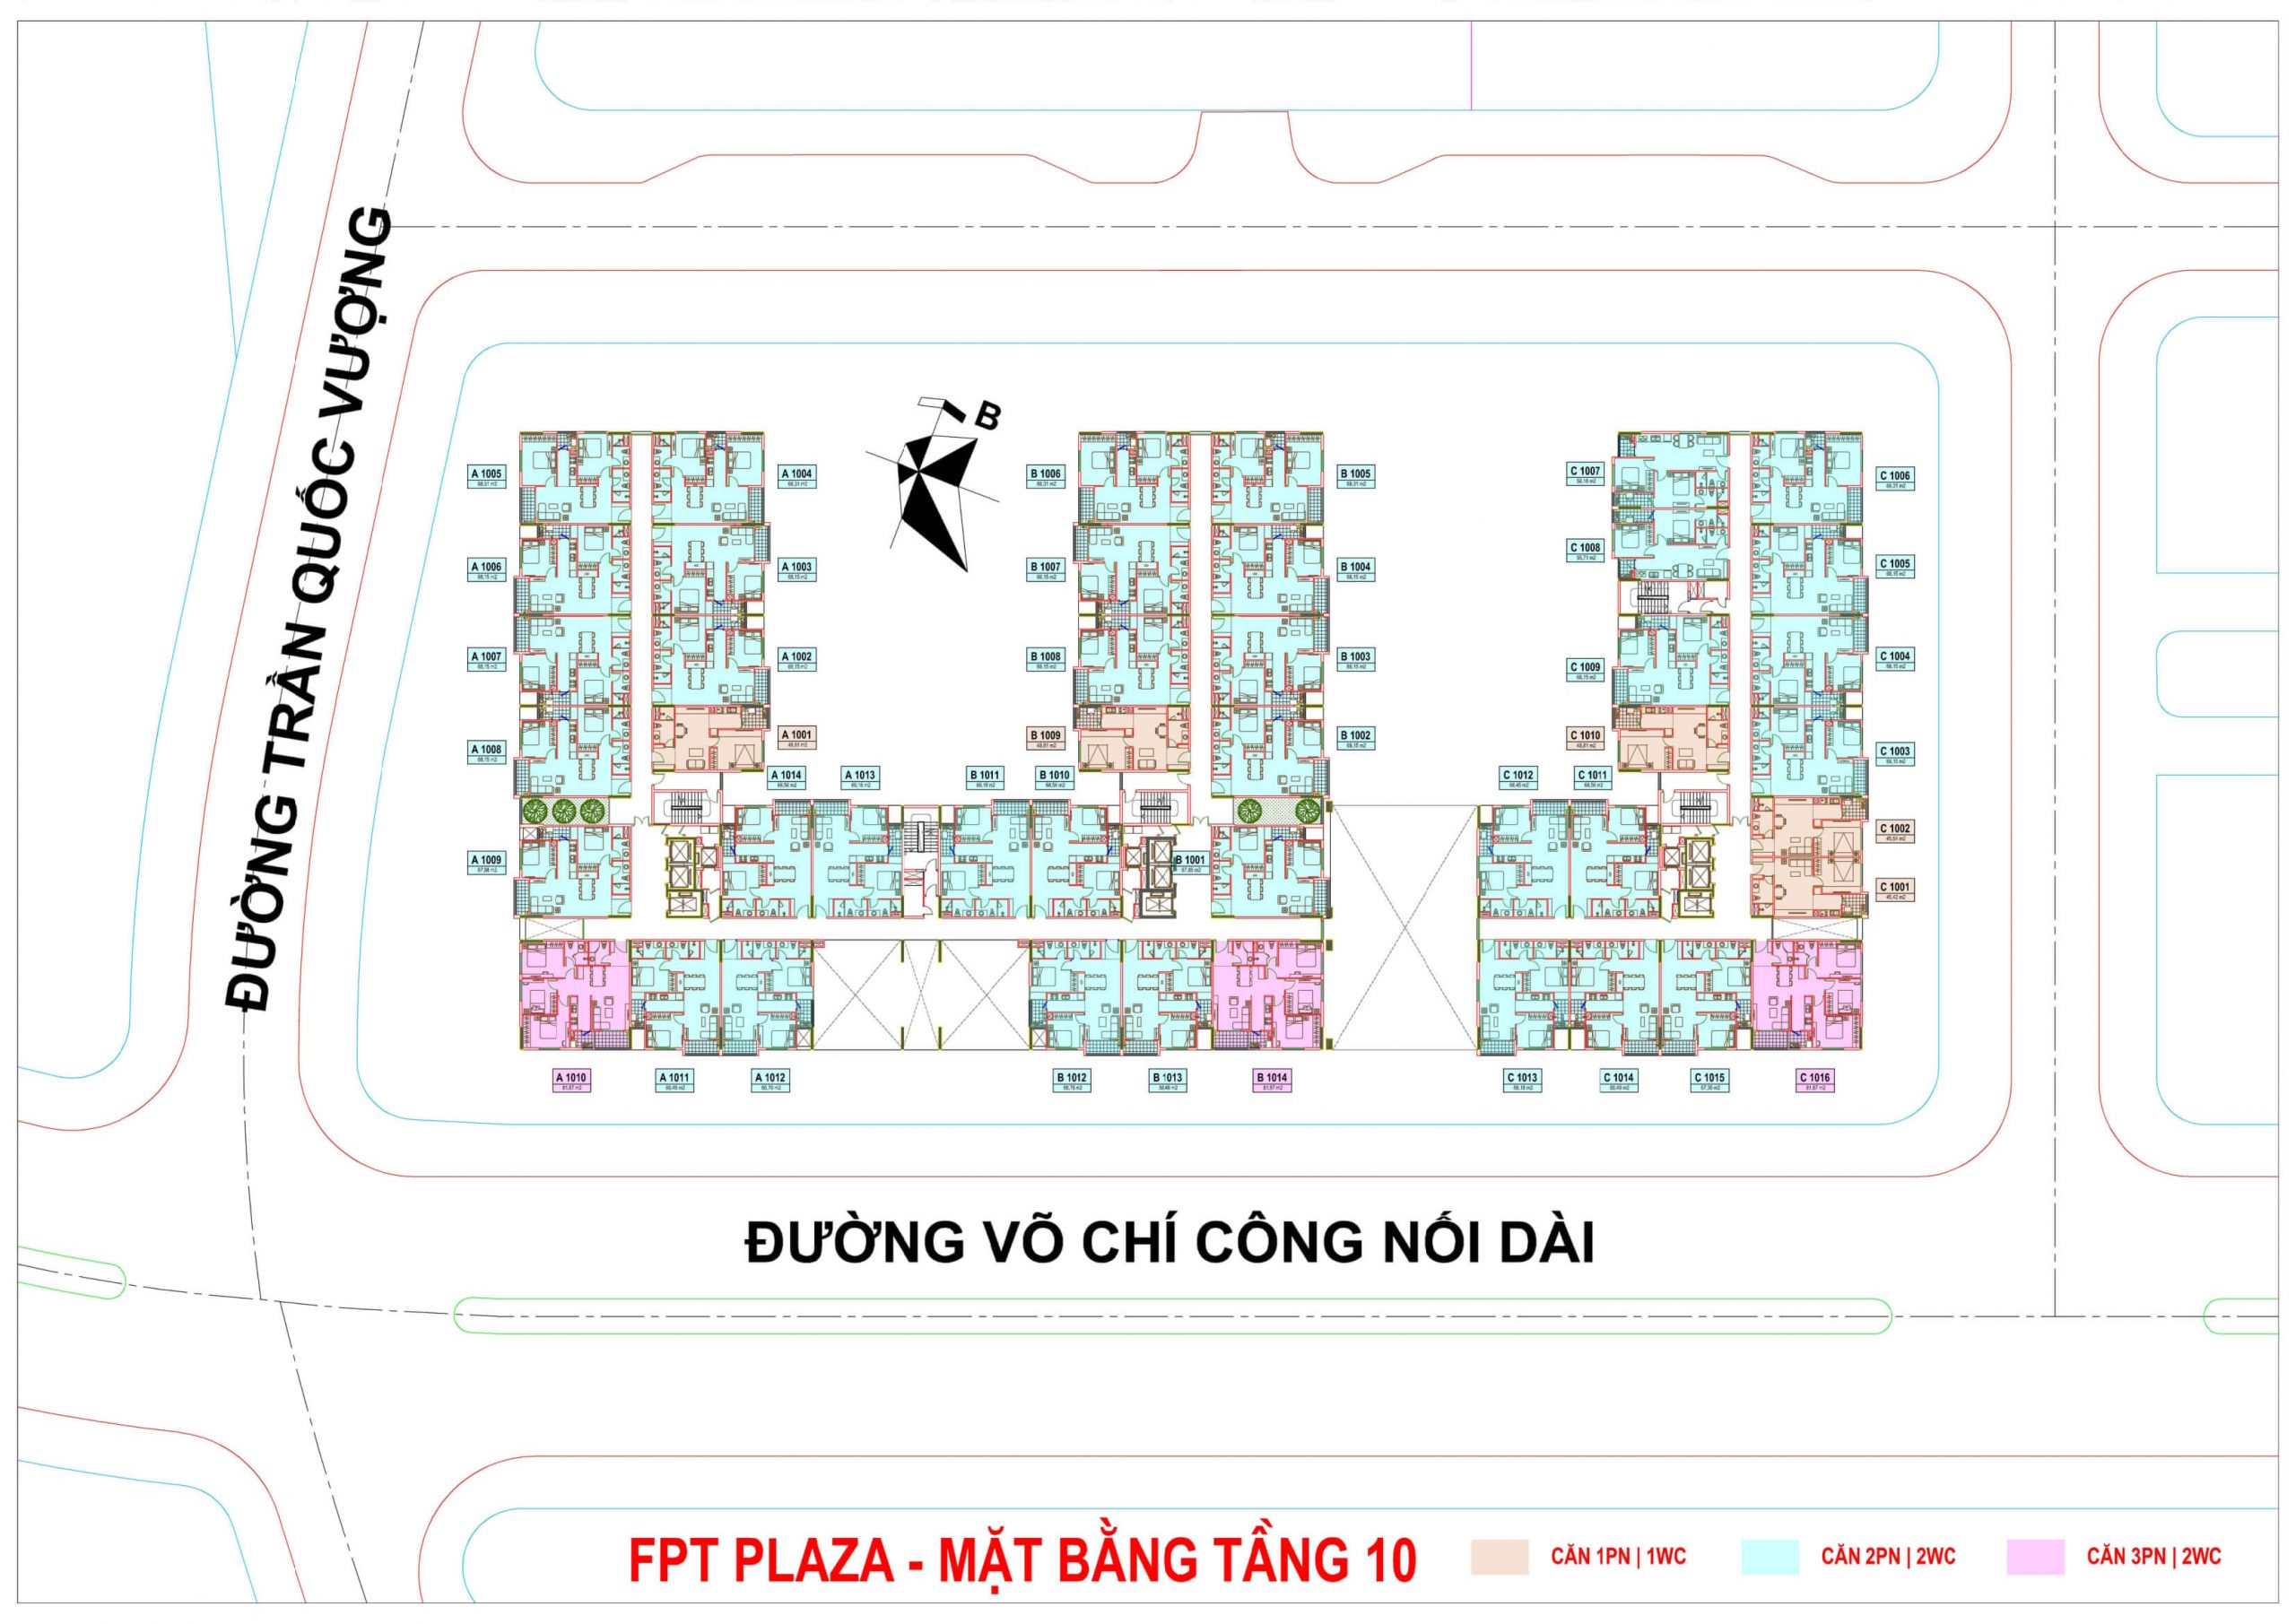 FPT PLAZA 1 Mặt bằng tầng 10